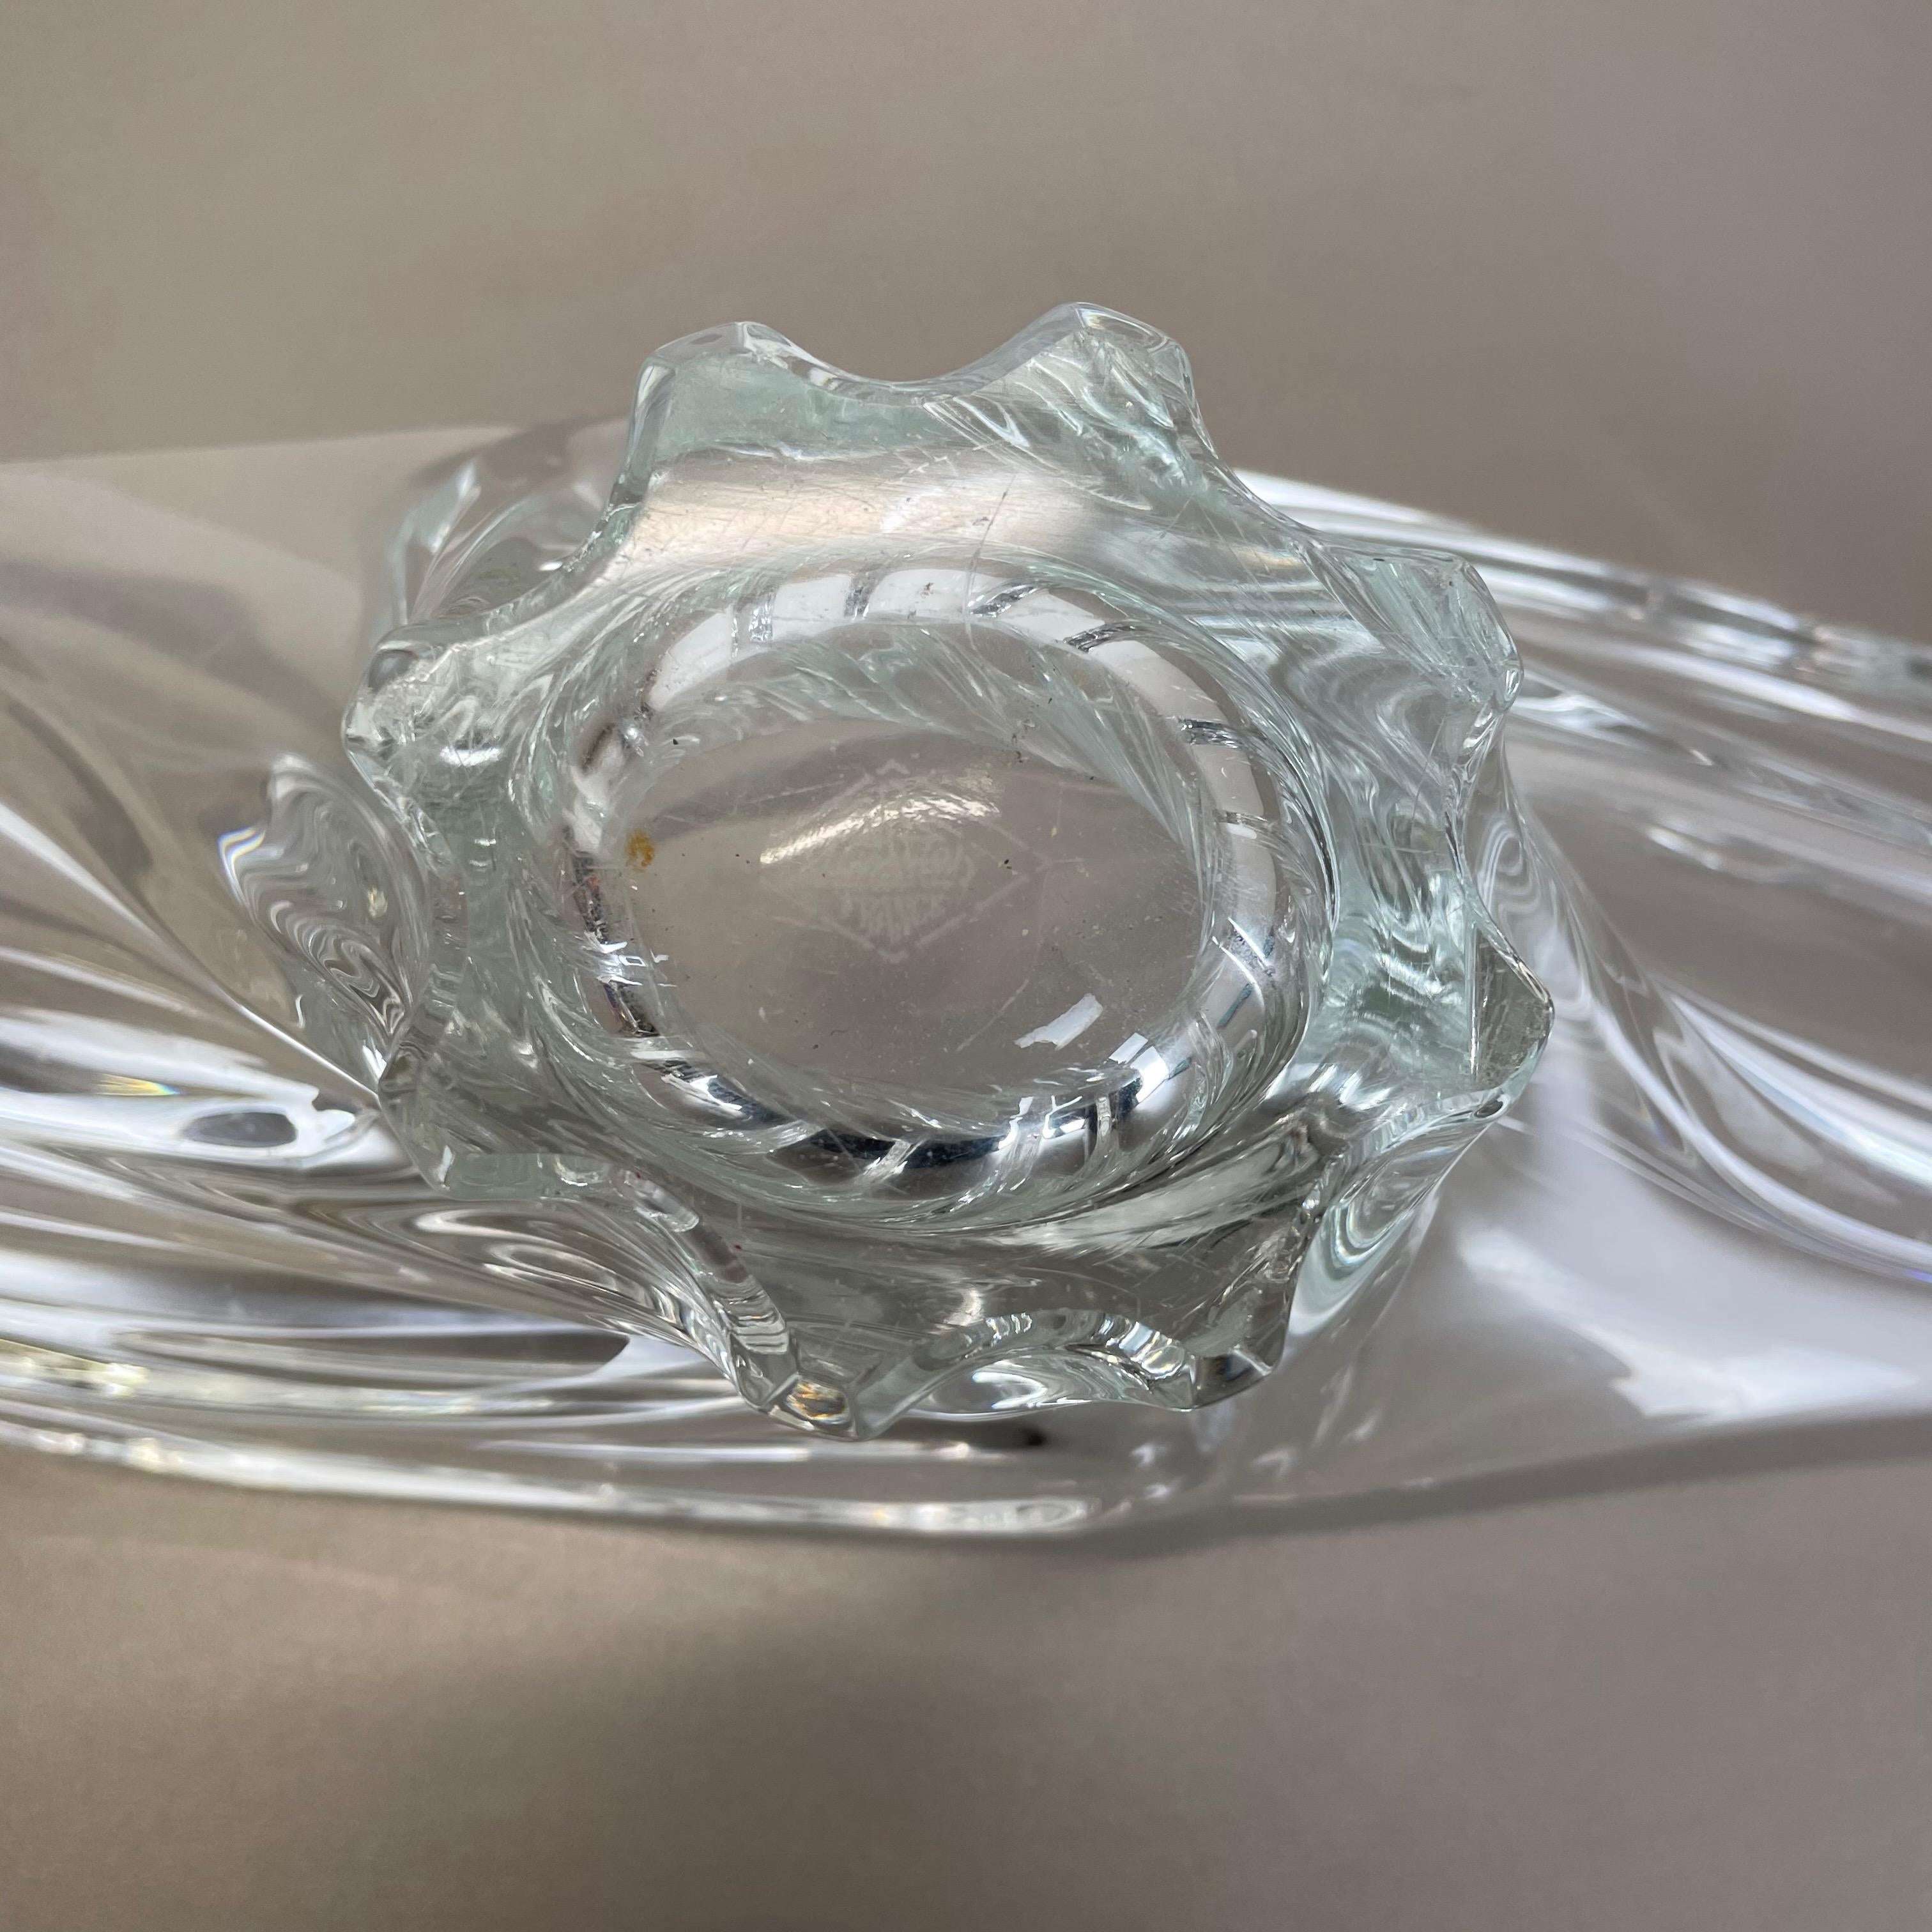 Large Floral Crystal Glass Centerpiece Shell Bowl by Art Vannes, France, 1970 For Sale 10